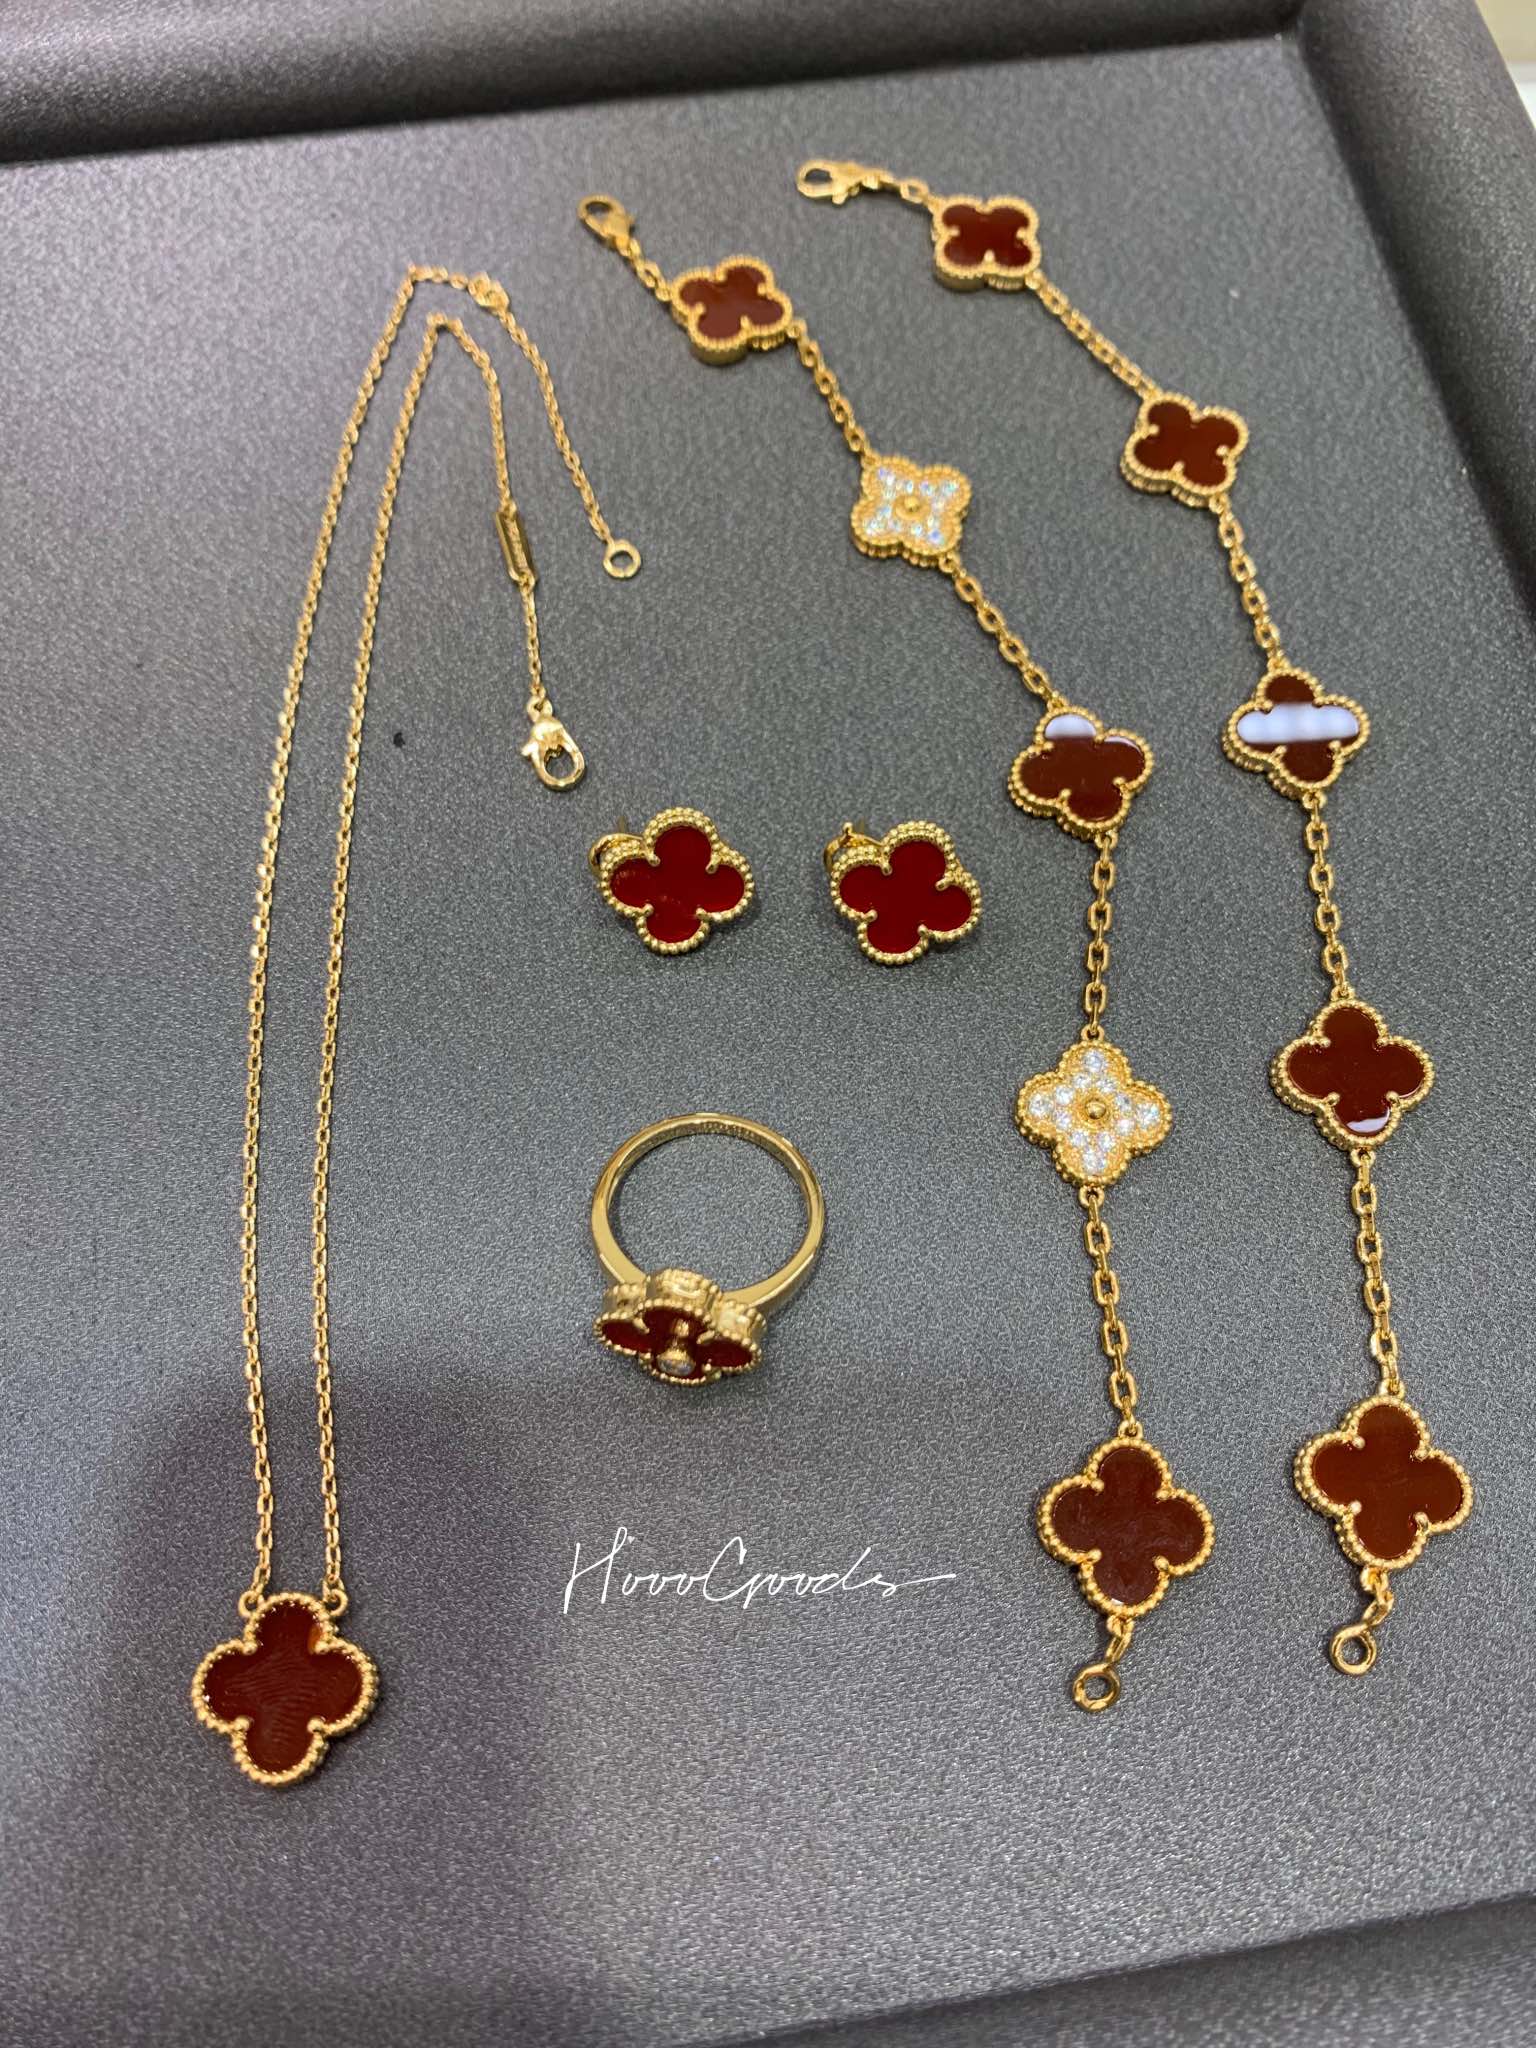 Van cleef Carnelian Vintage Alhambra collection: 5 motifs bracelet, necklace, ring and earrings